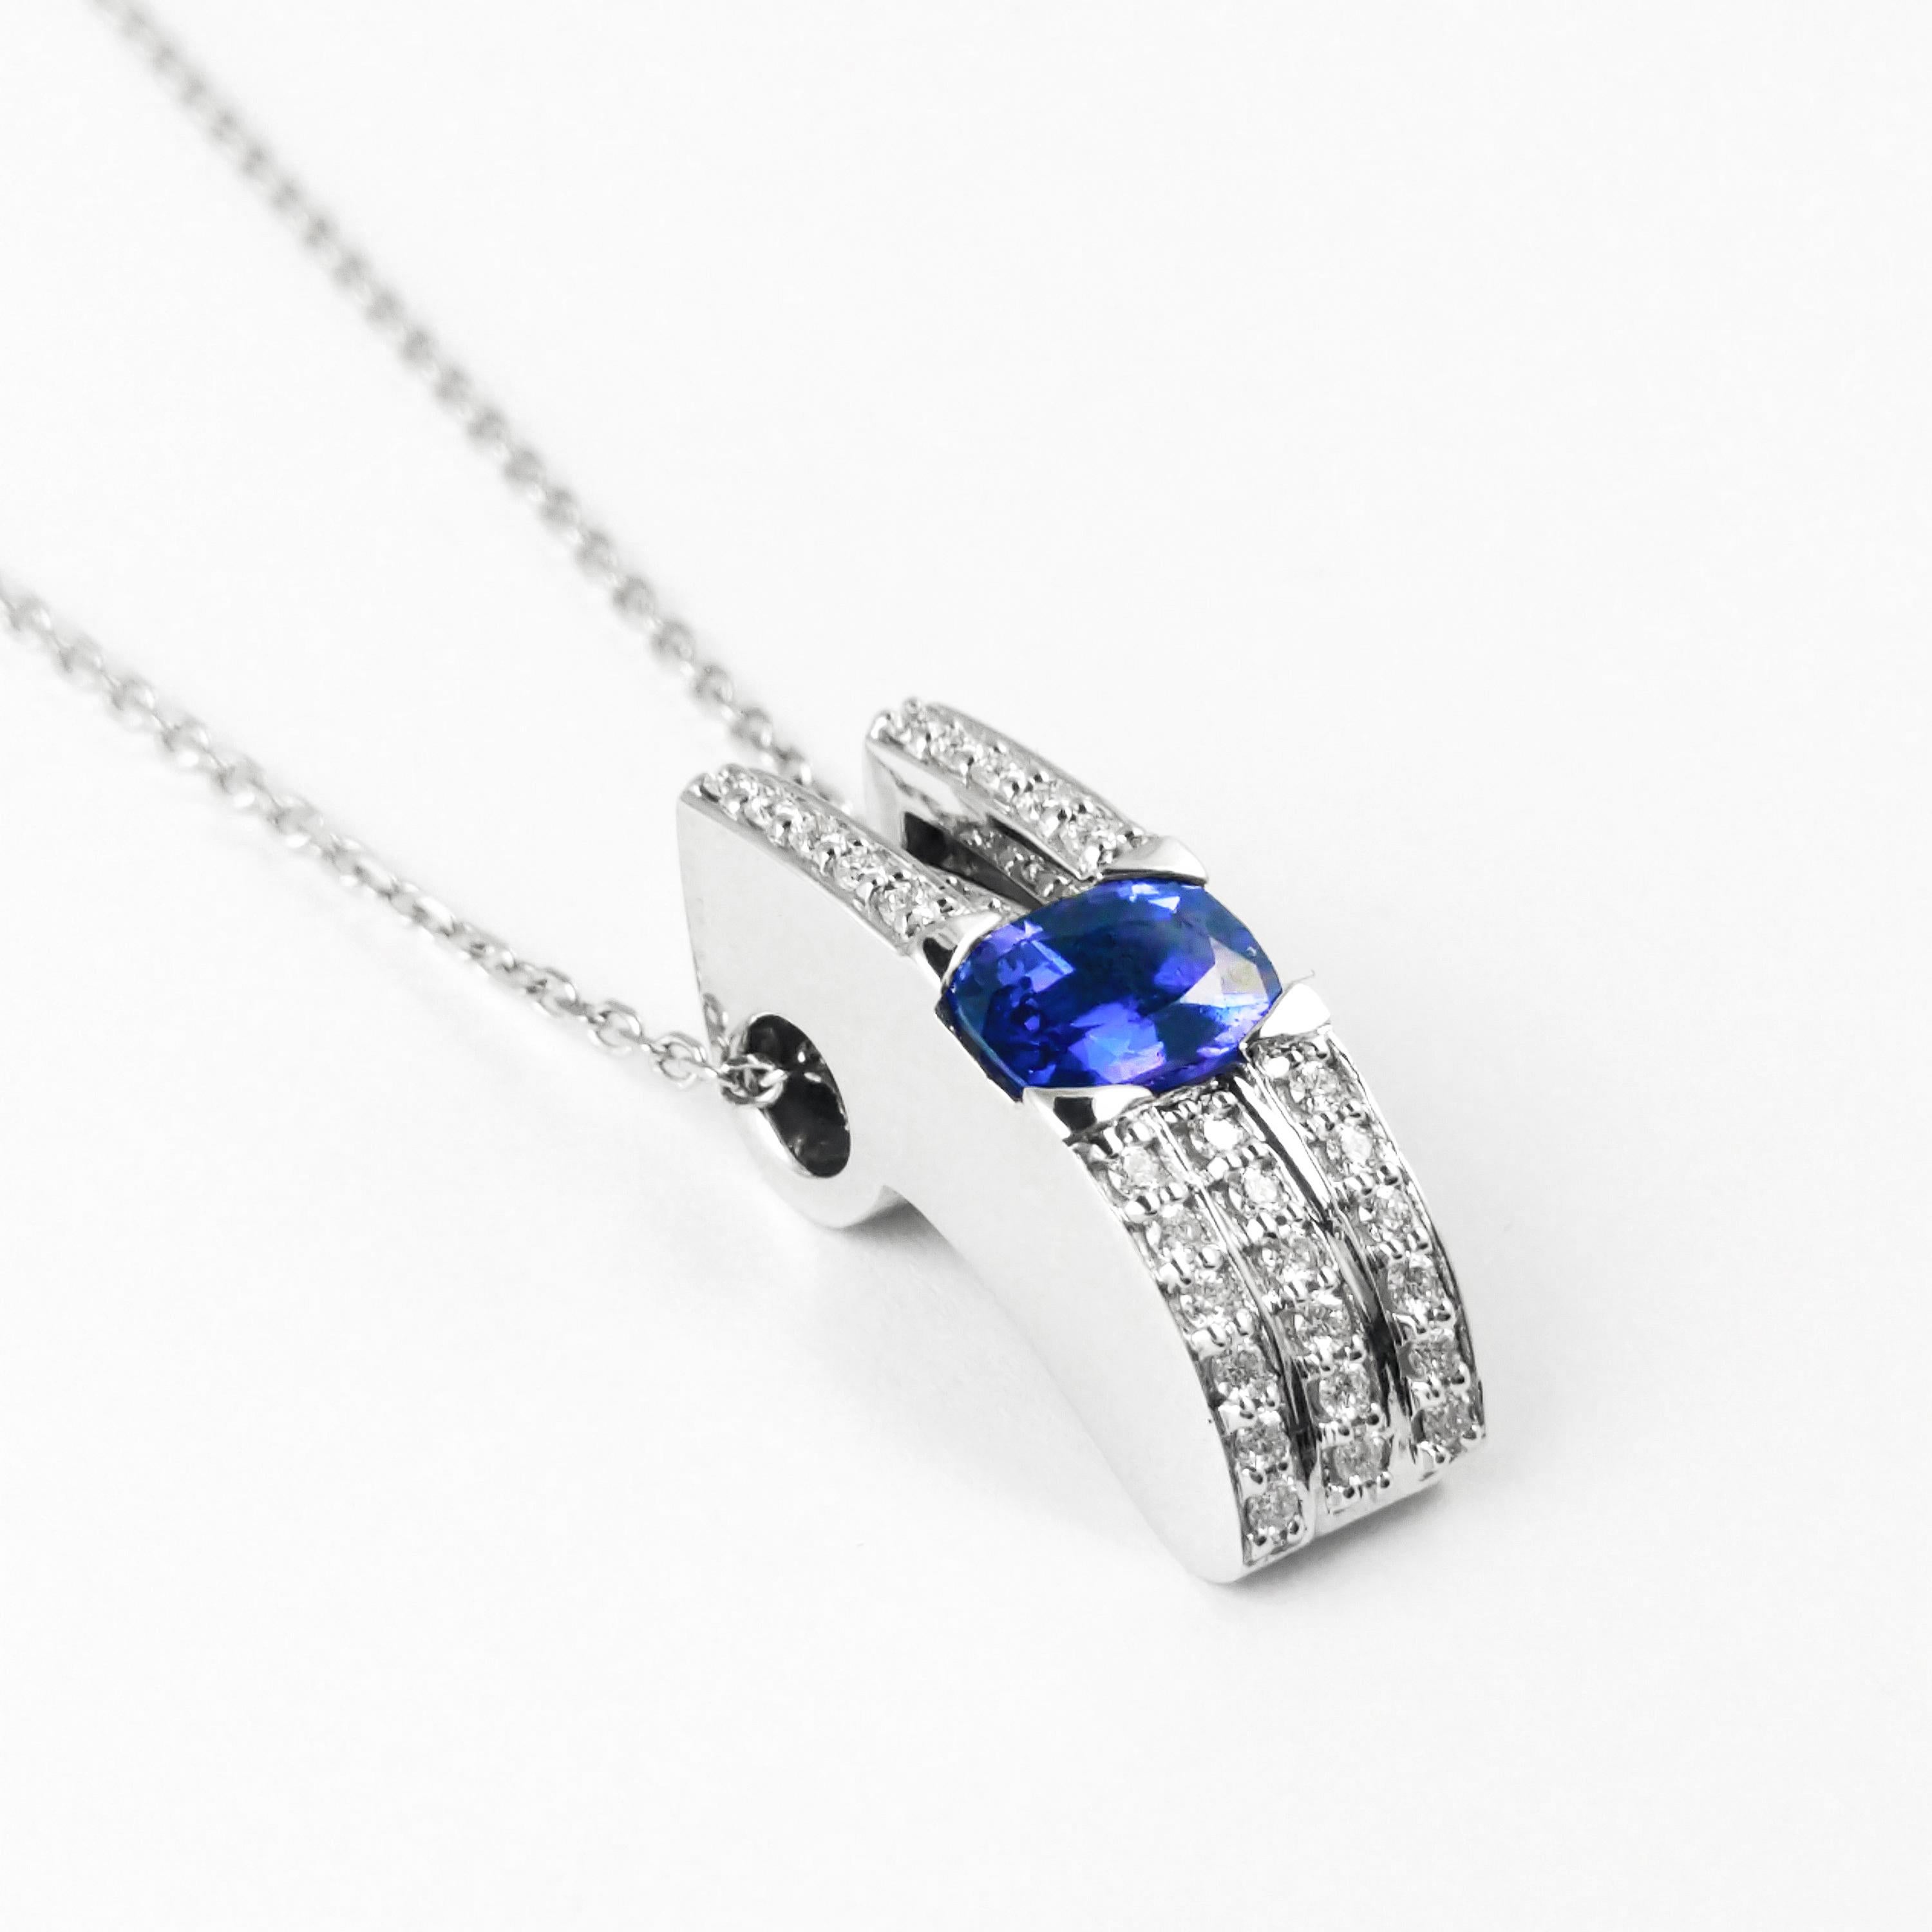 This ladies 14K white gold slide pendant features a rare 1.06ct purple color-change sapphire handset east to west. The necklace is accented with round bead-set diamonds to add contract and softness. The approximate diamond weight is 0.40cts total, G